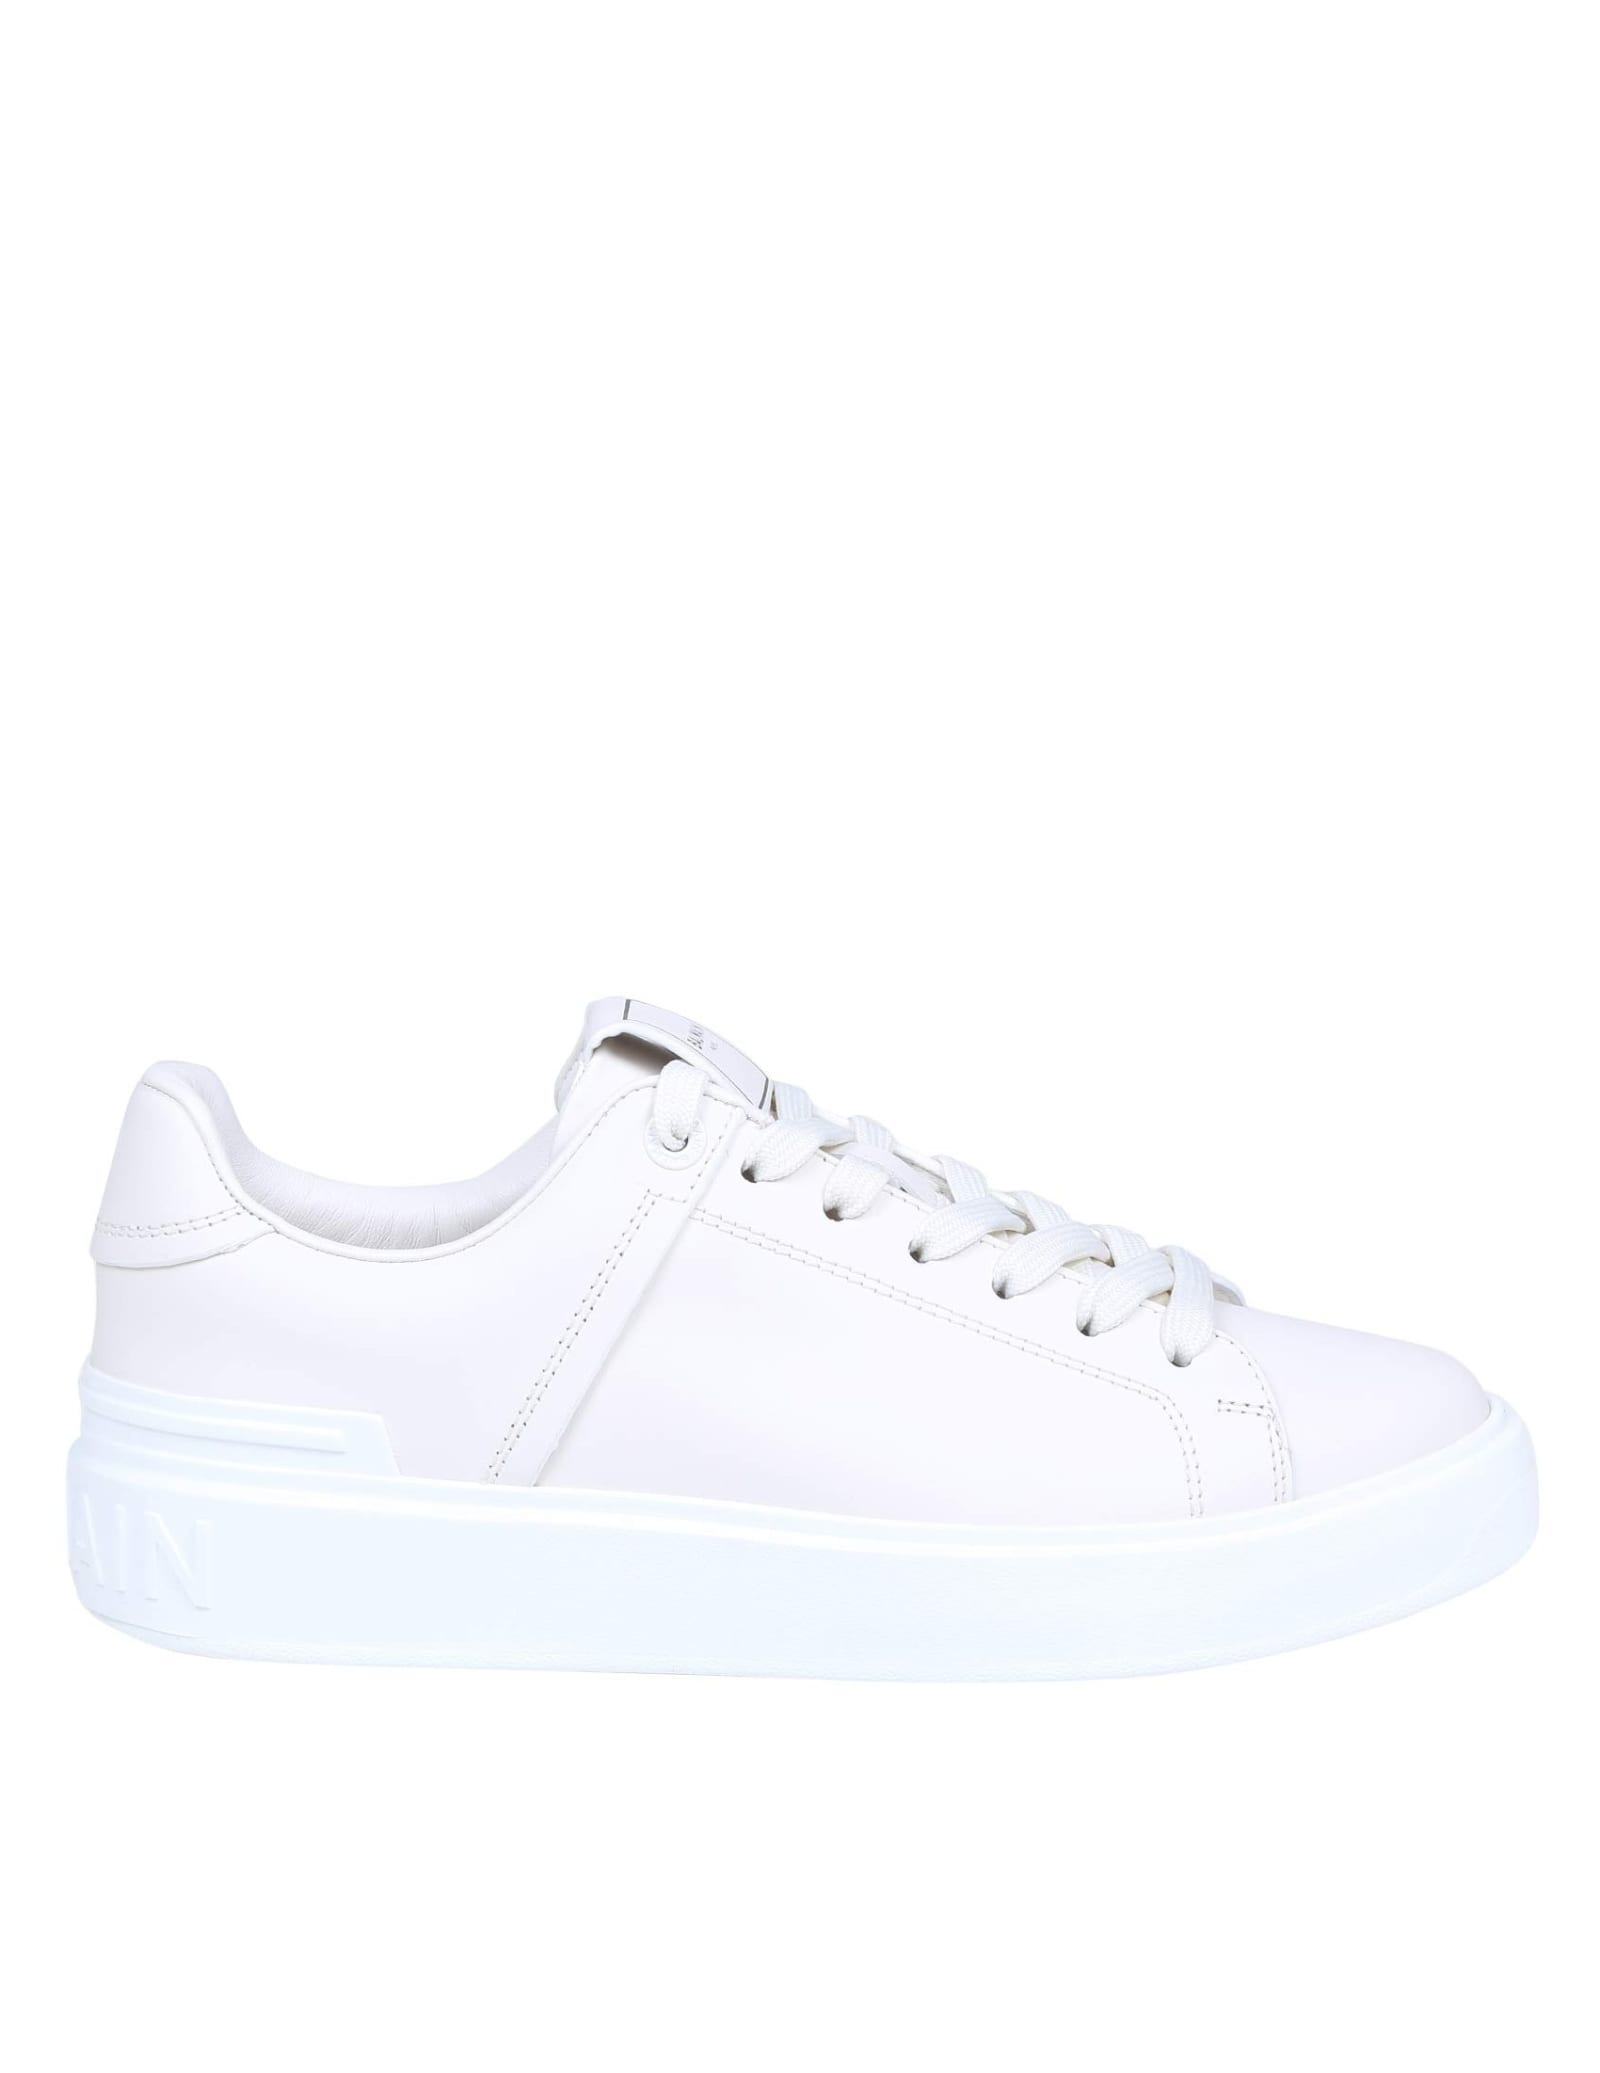 Balmain B-court Sneakers In Off White Leather